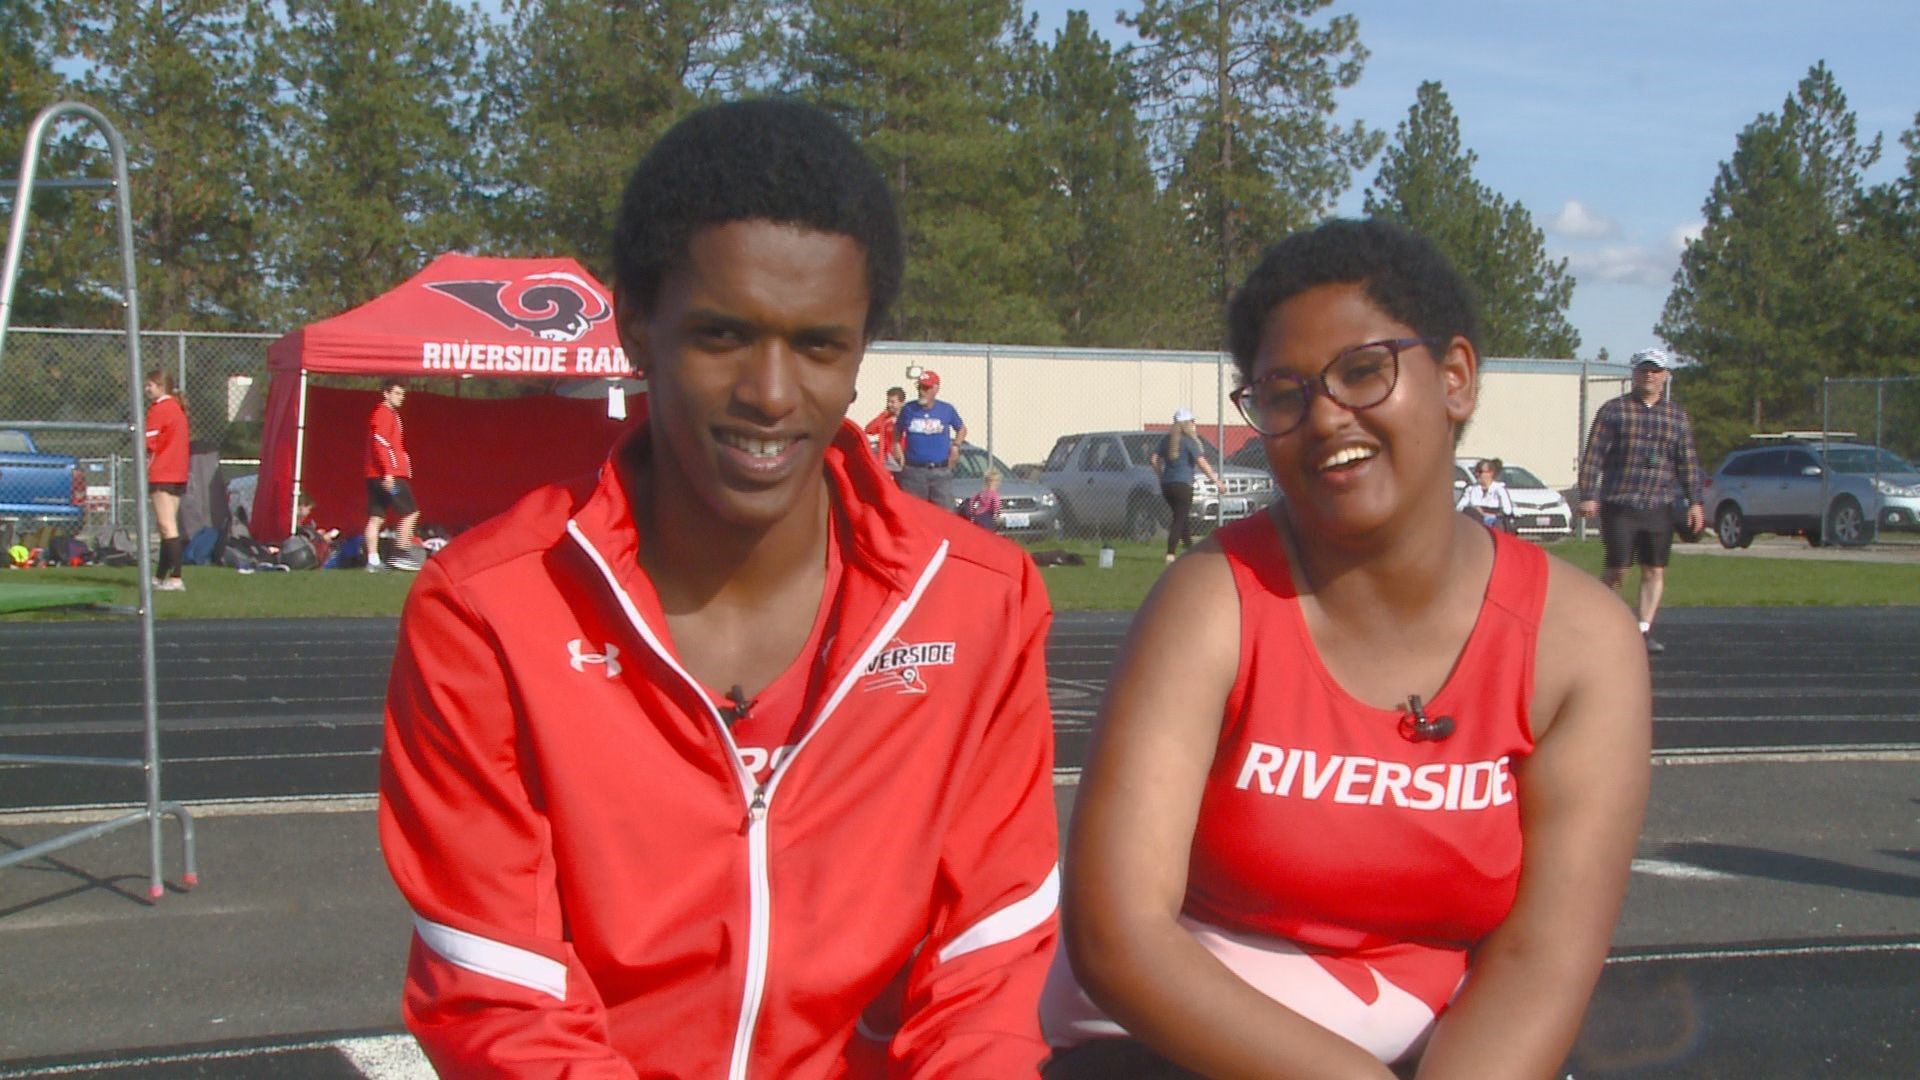 Jamar is headed to UW in the fall for running, but is getting one last season to be on the same track team as his sister, Jacinda, who has Cerebral Palsy.